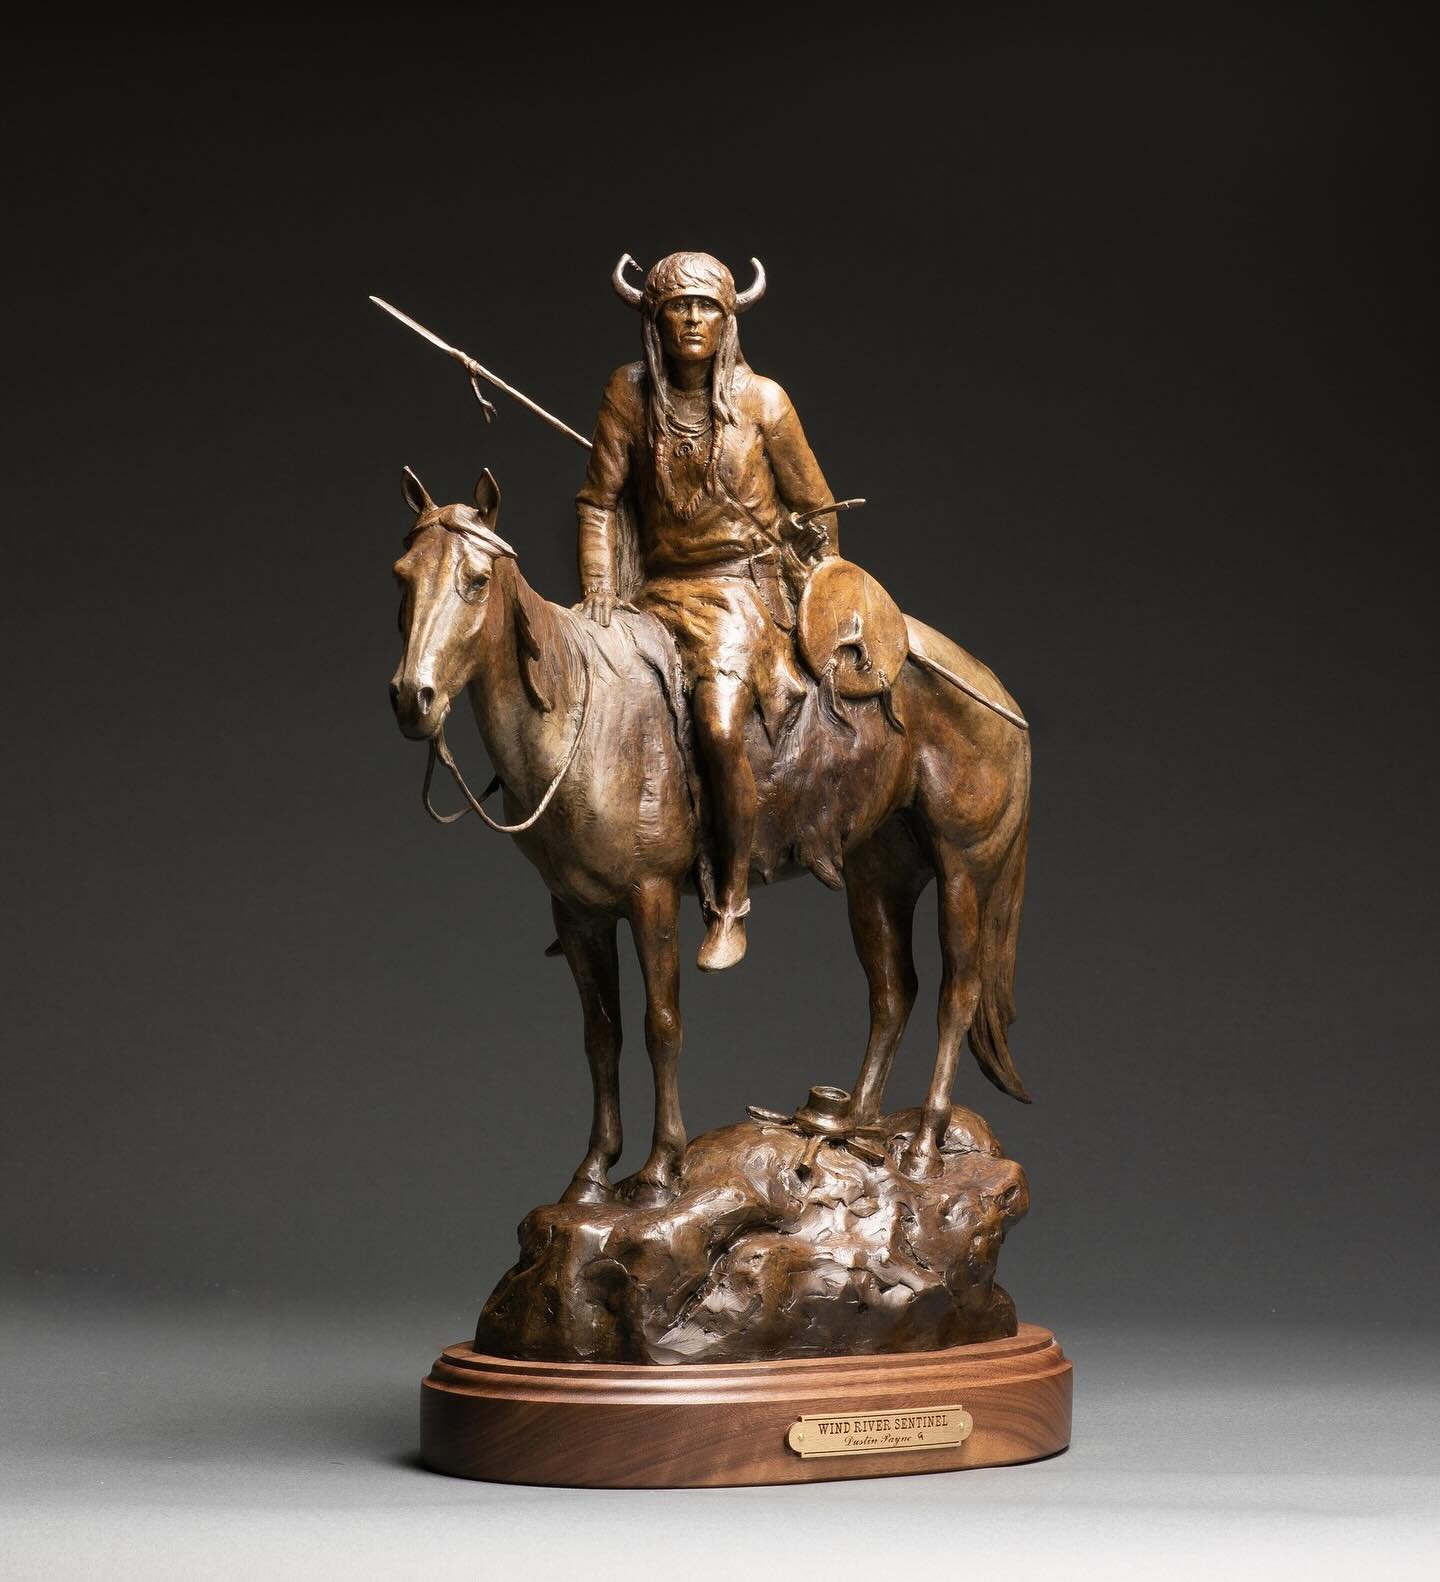 We only have a few bronzes left in the popular limited edition of &ldquo;Wind River Sentinel&rdquo;. If interested in reserving your piece in this edition contact Tammy ~ tammy@dustinpayne.com⁠
⁠
&ldquo;I try to put meaningful aspects into my work th